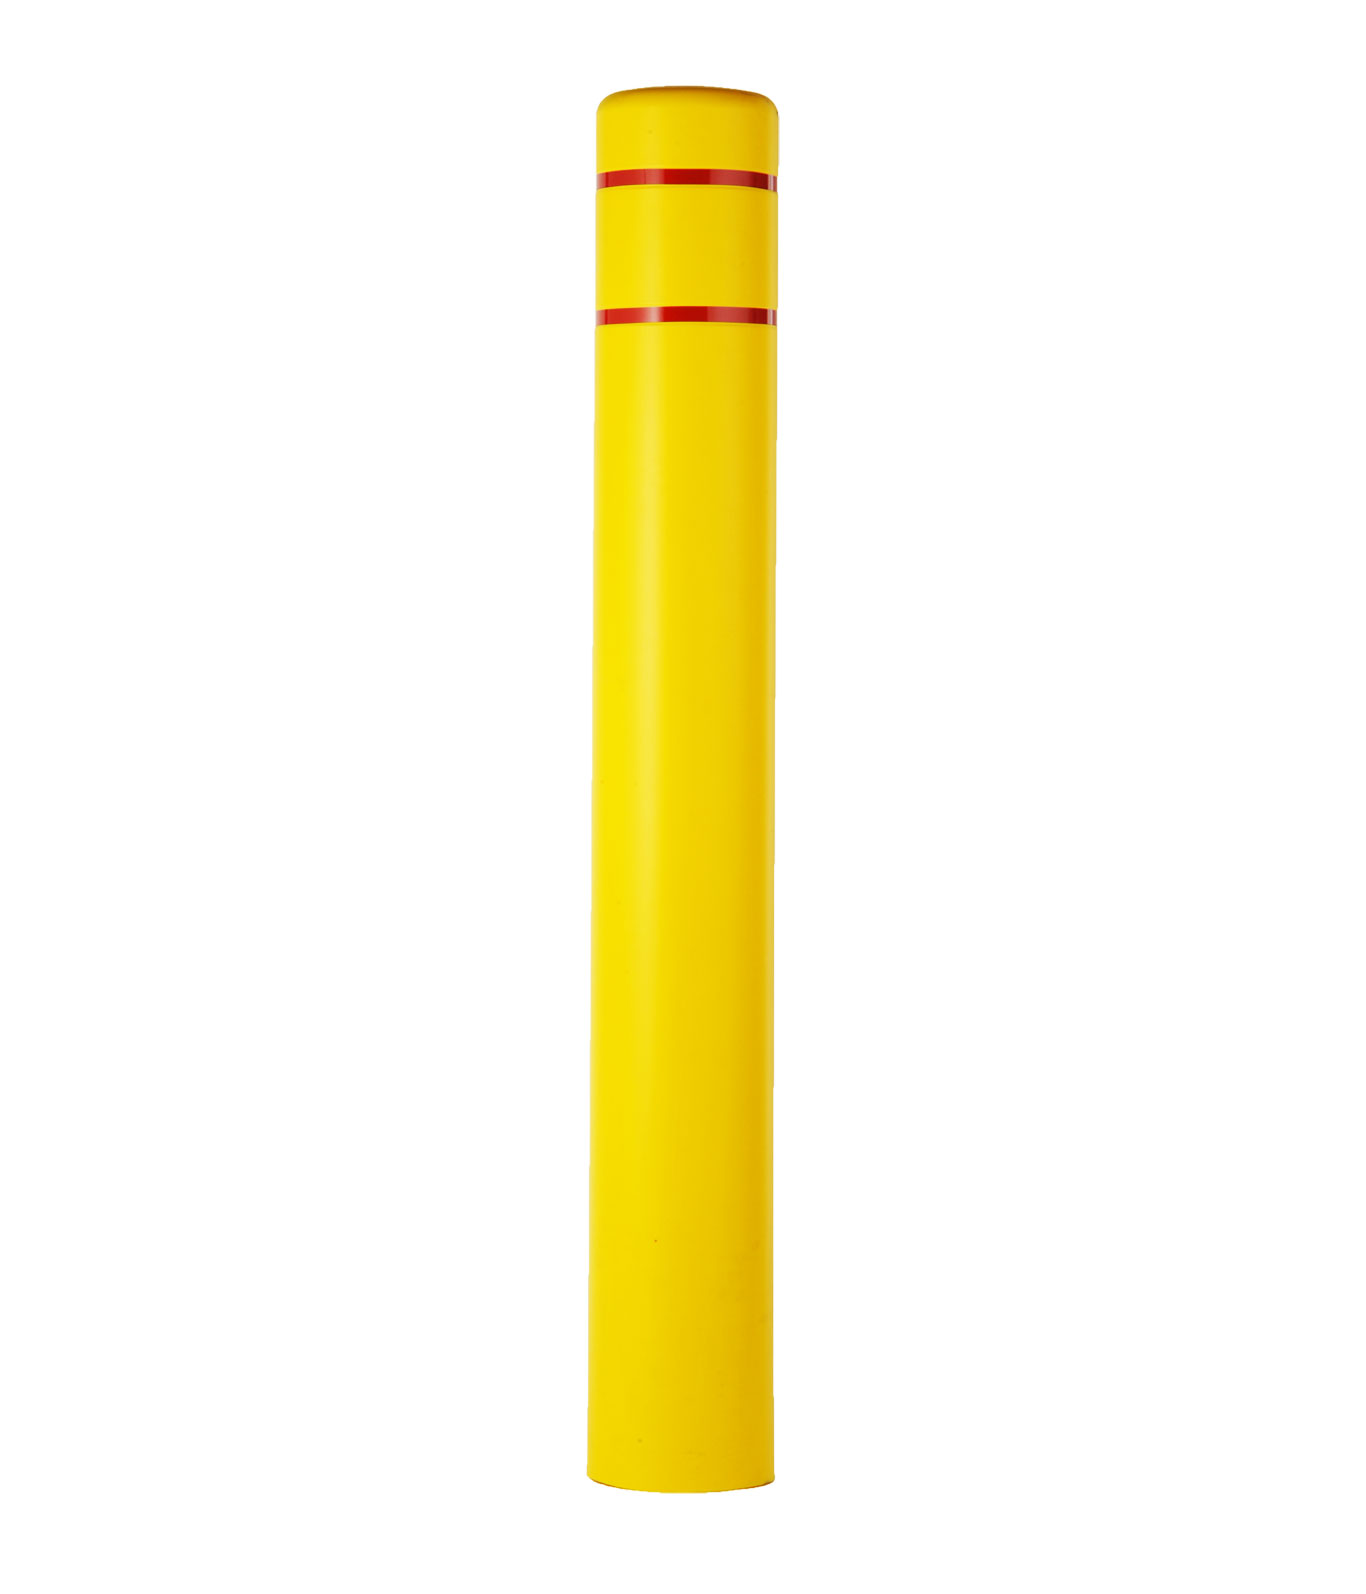 Yellow R-7120 plastic bollard cover with red reflective strip